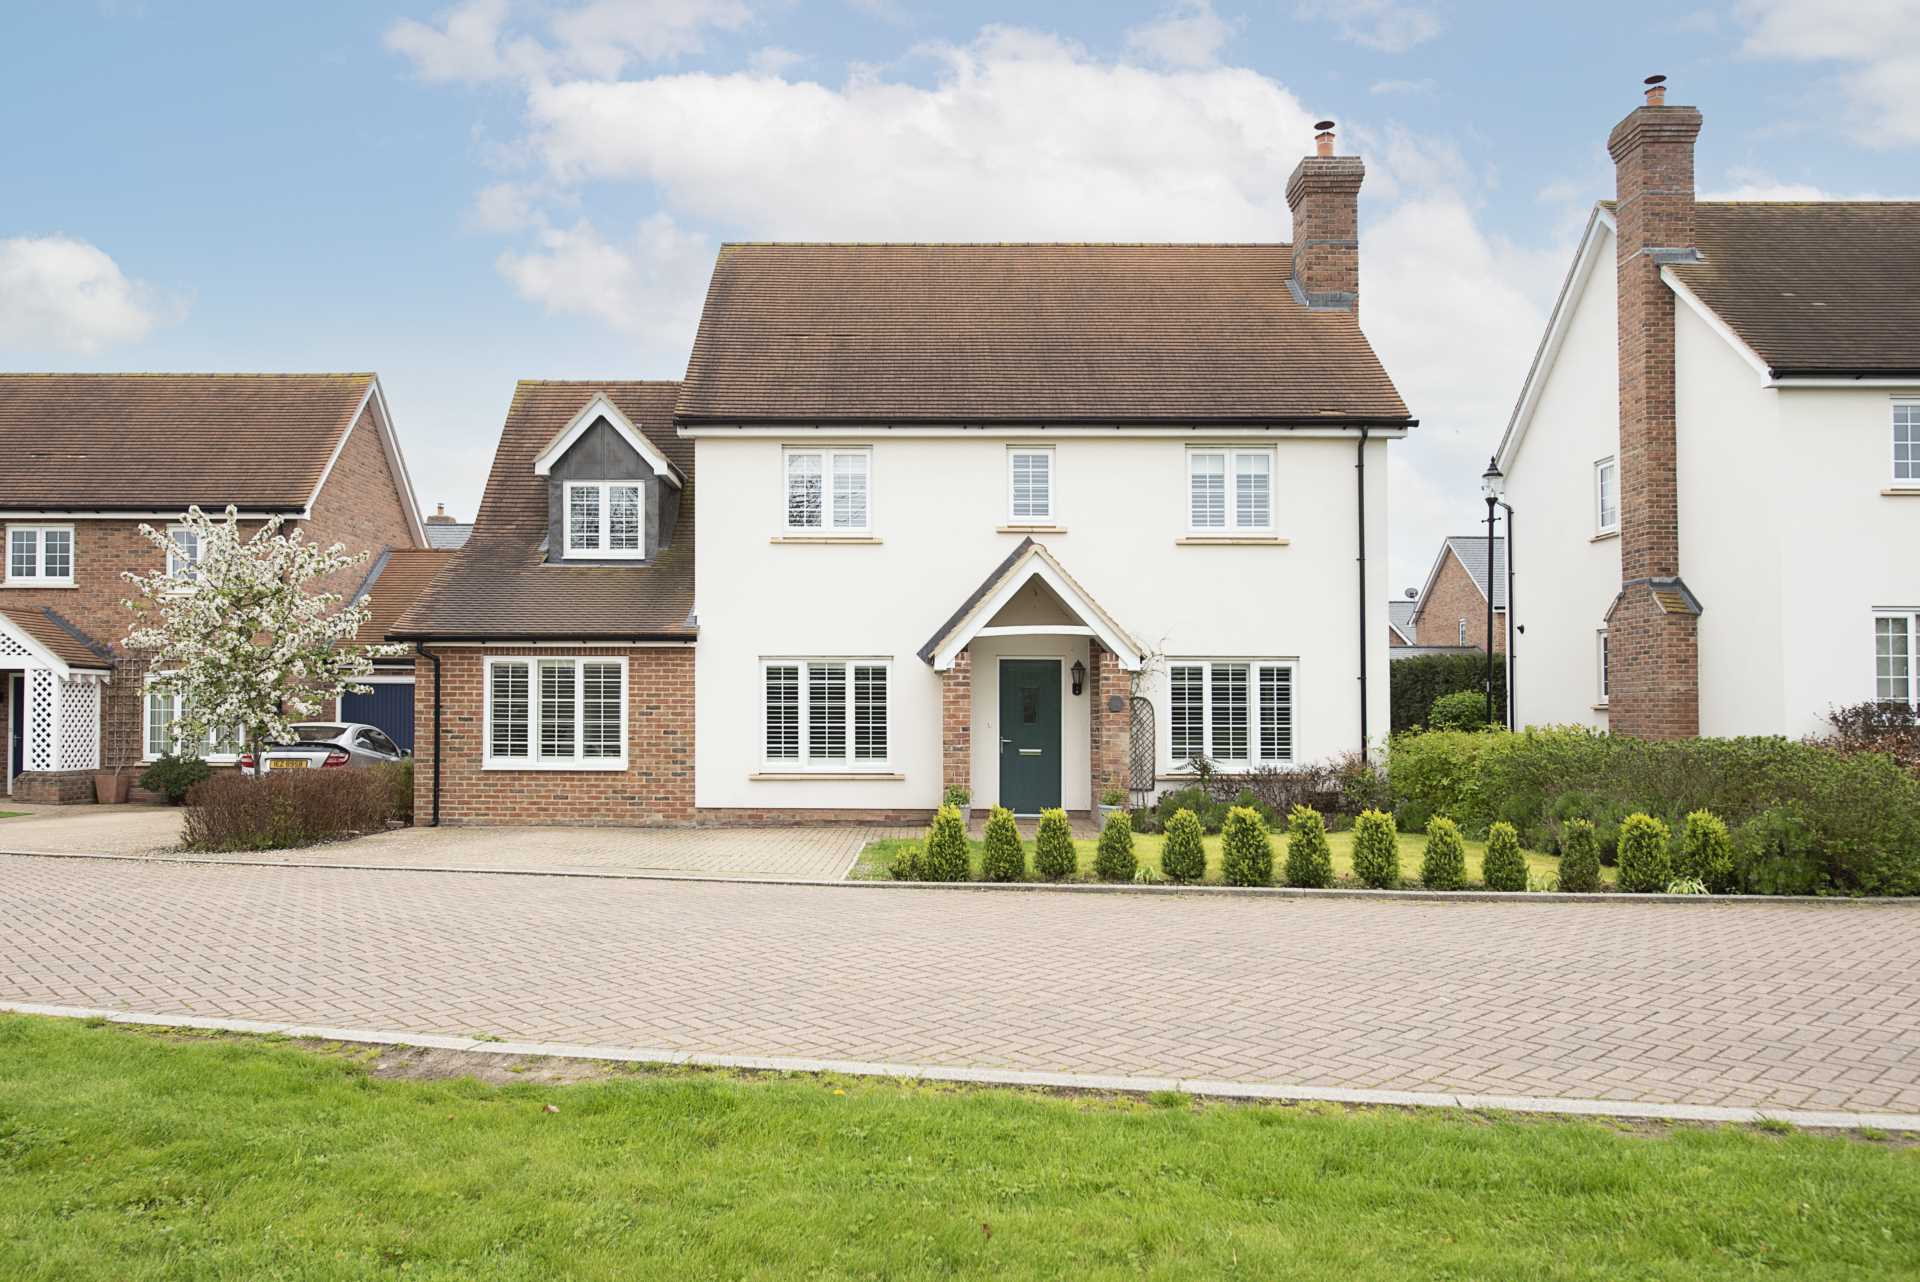 4 bed Detached House for rent in Leighton Buzzard. From Cesare & Co - Residential Sales